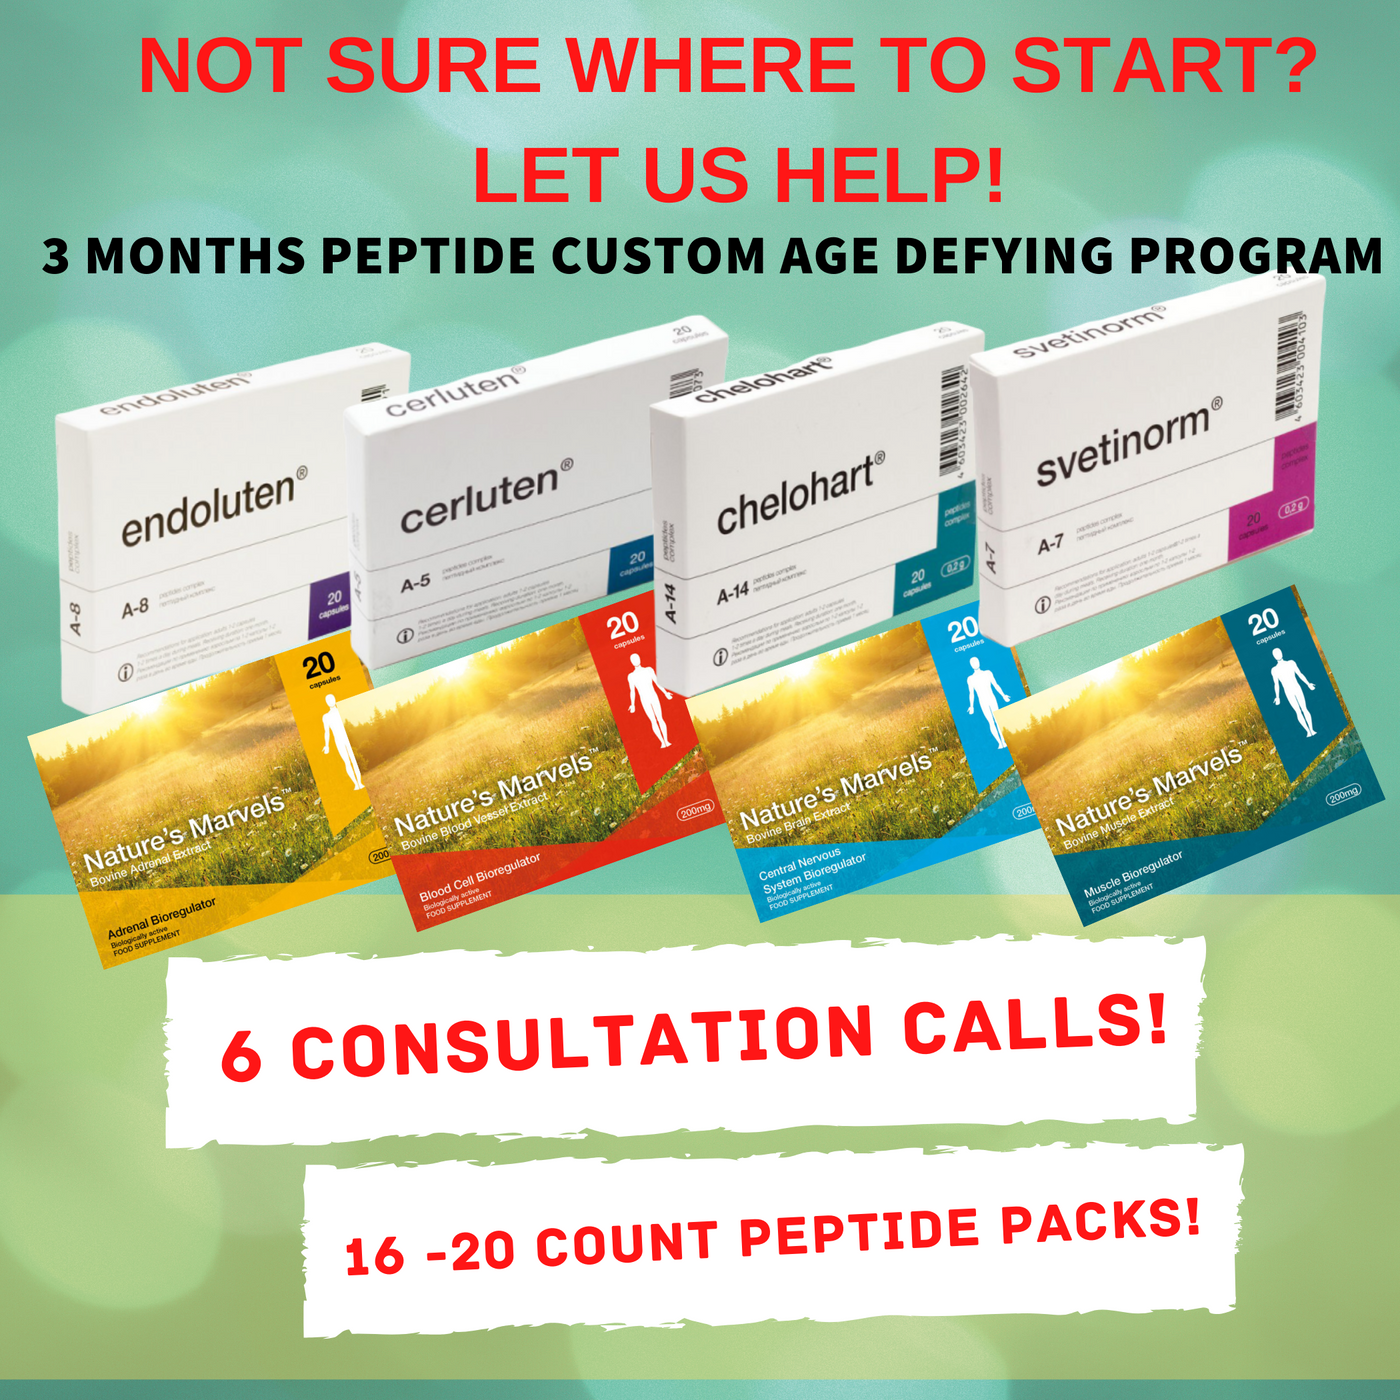 3 Month Peptide Custom Age Defying Program (16 Peptides and 4 Consultation Calls)